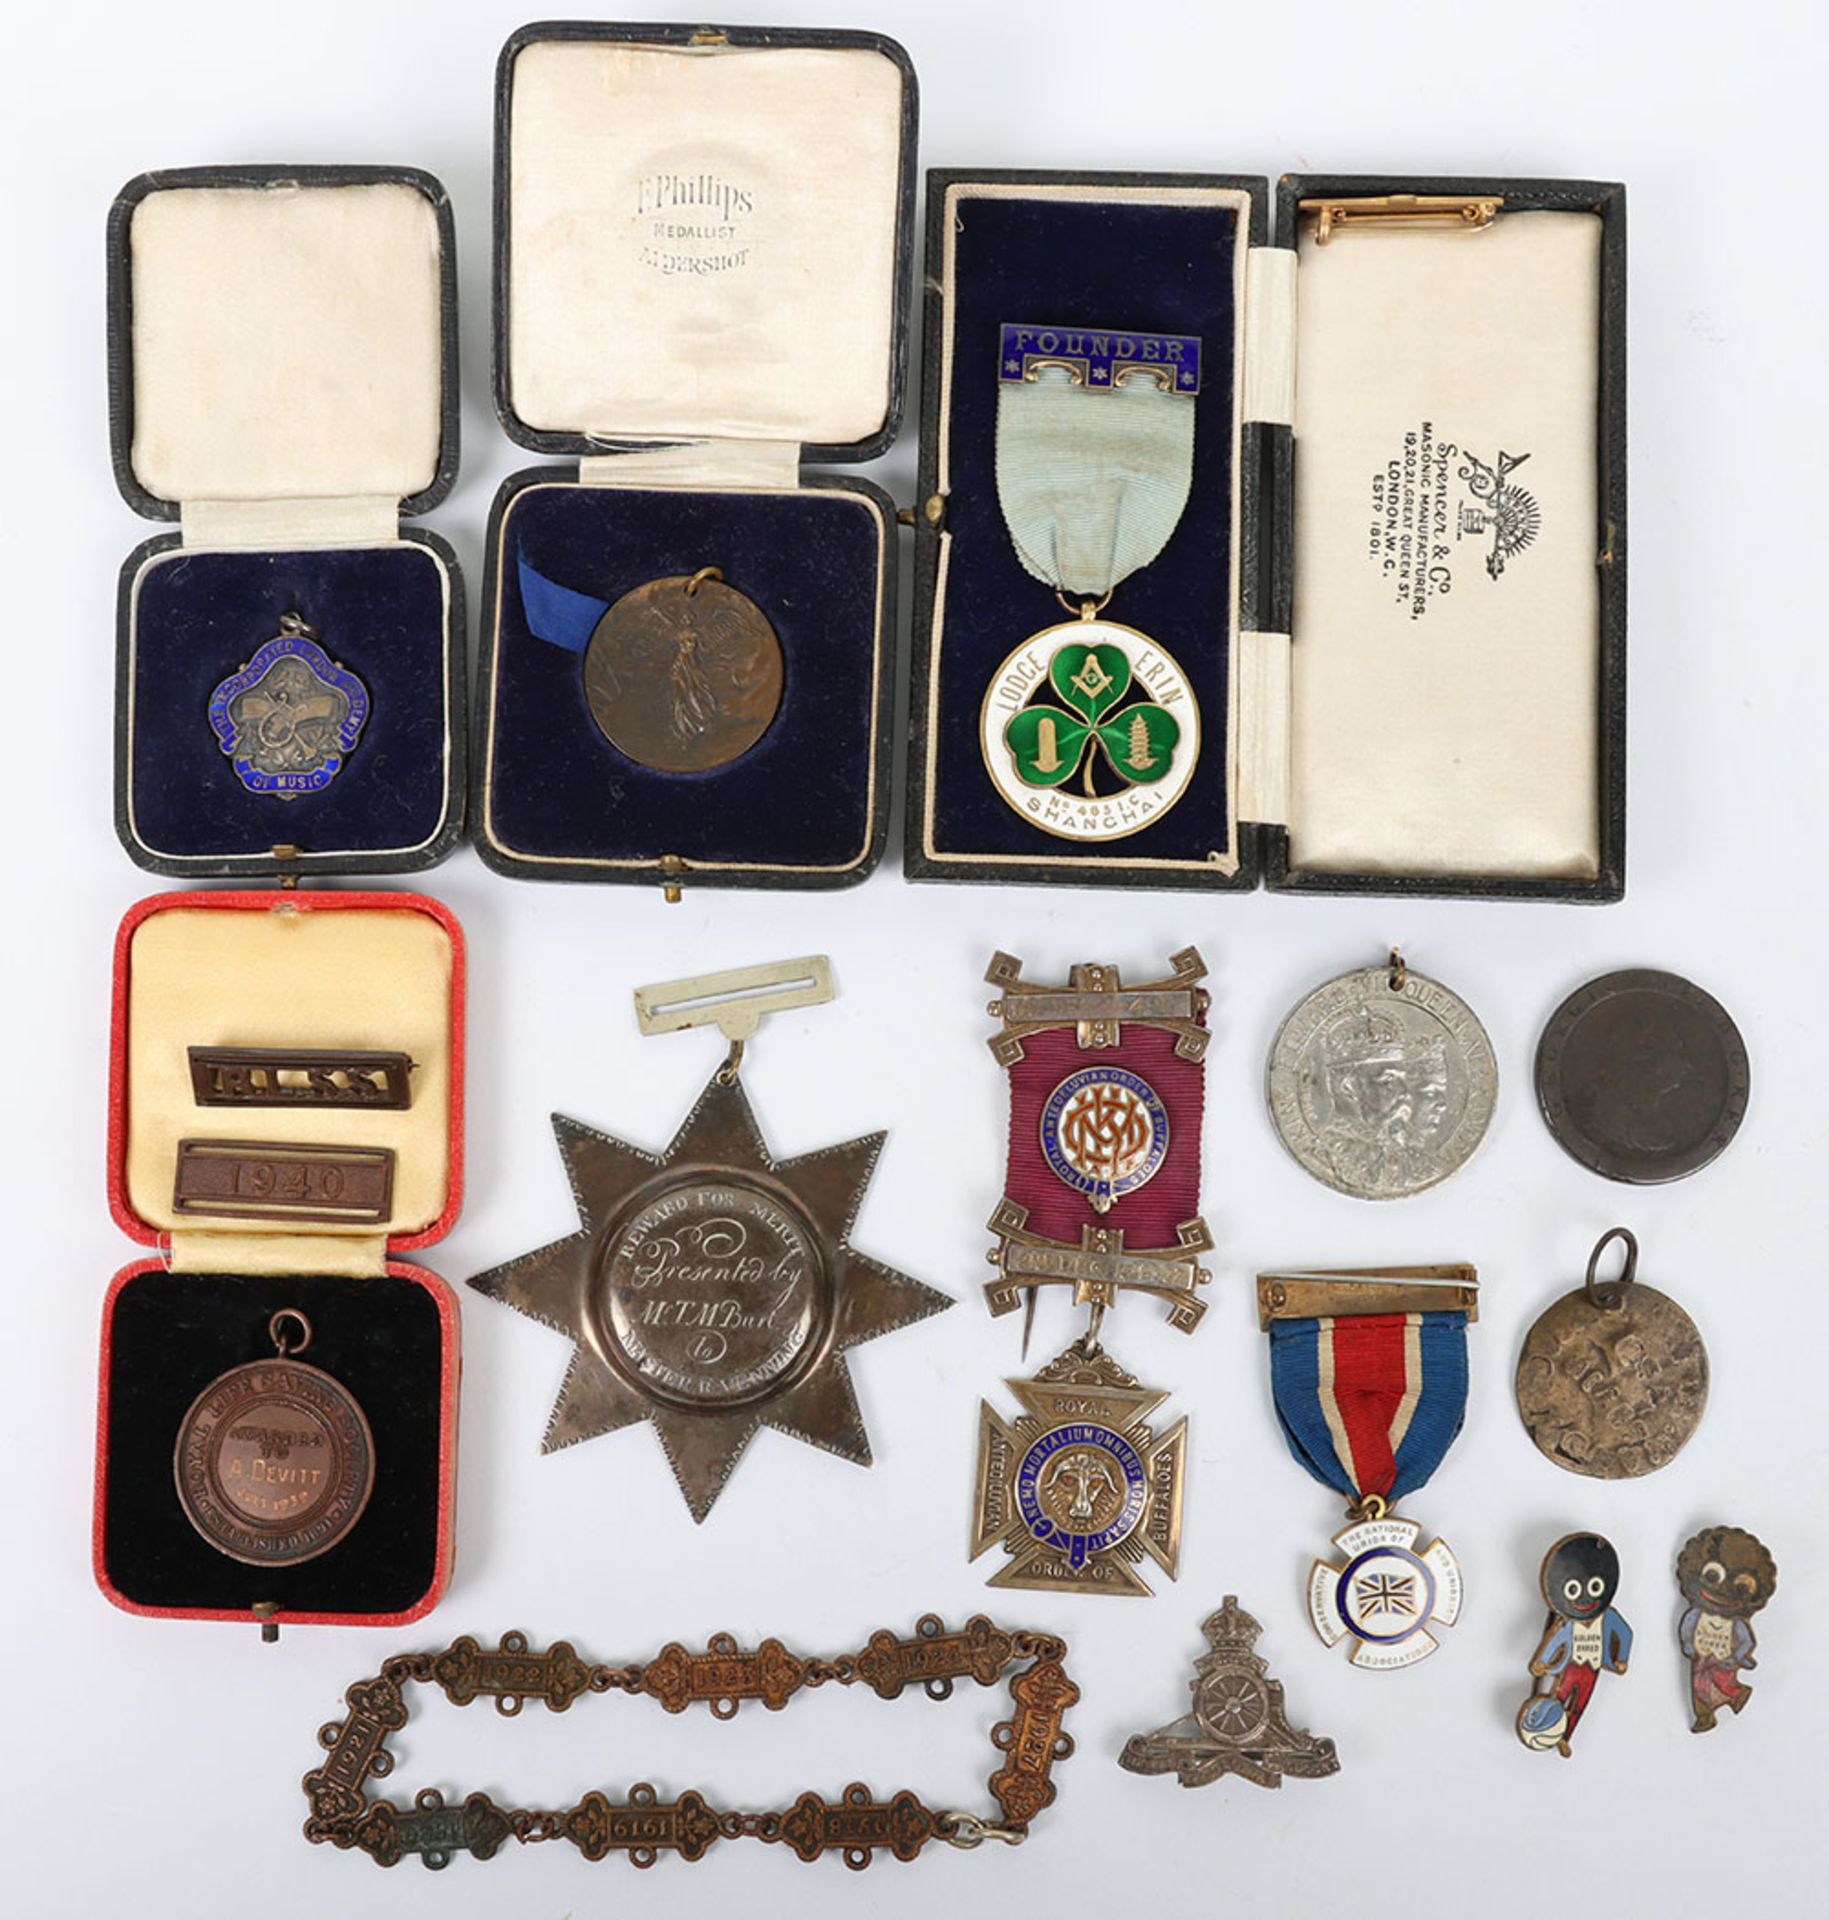 Quantity of Miscellaneous and Commemorative Medals